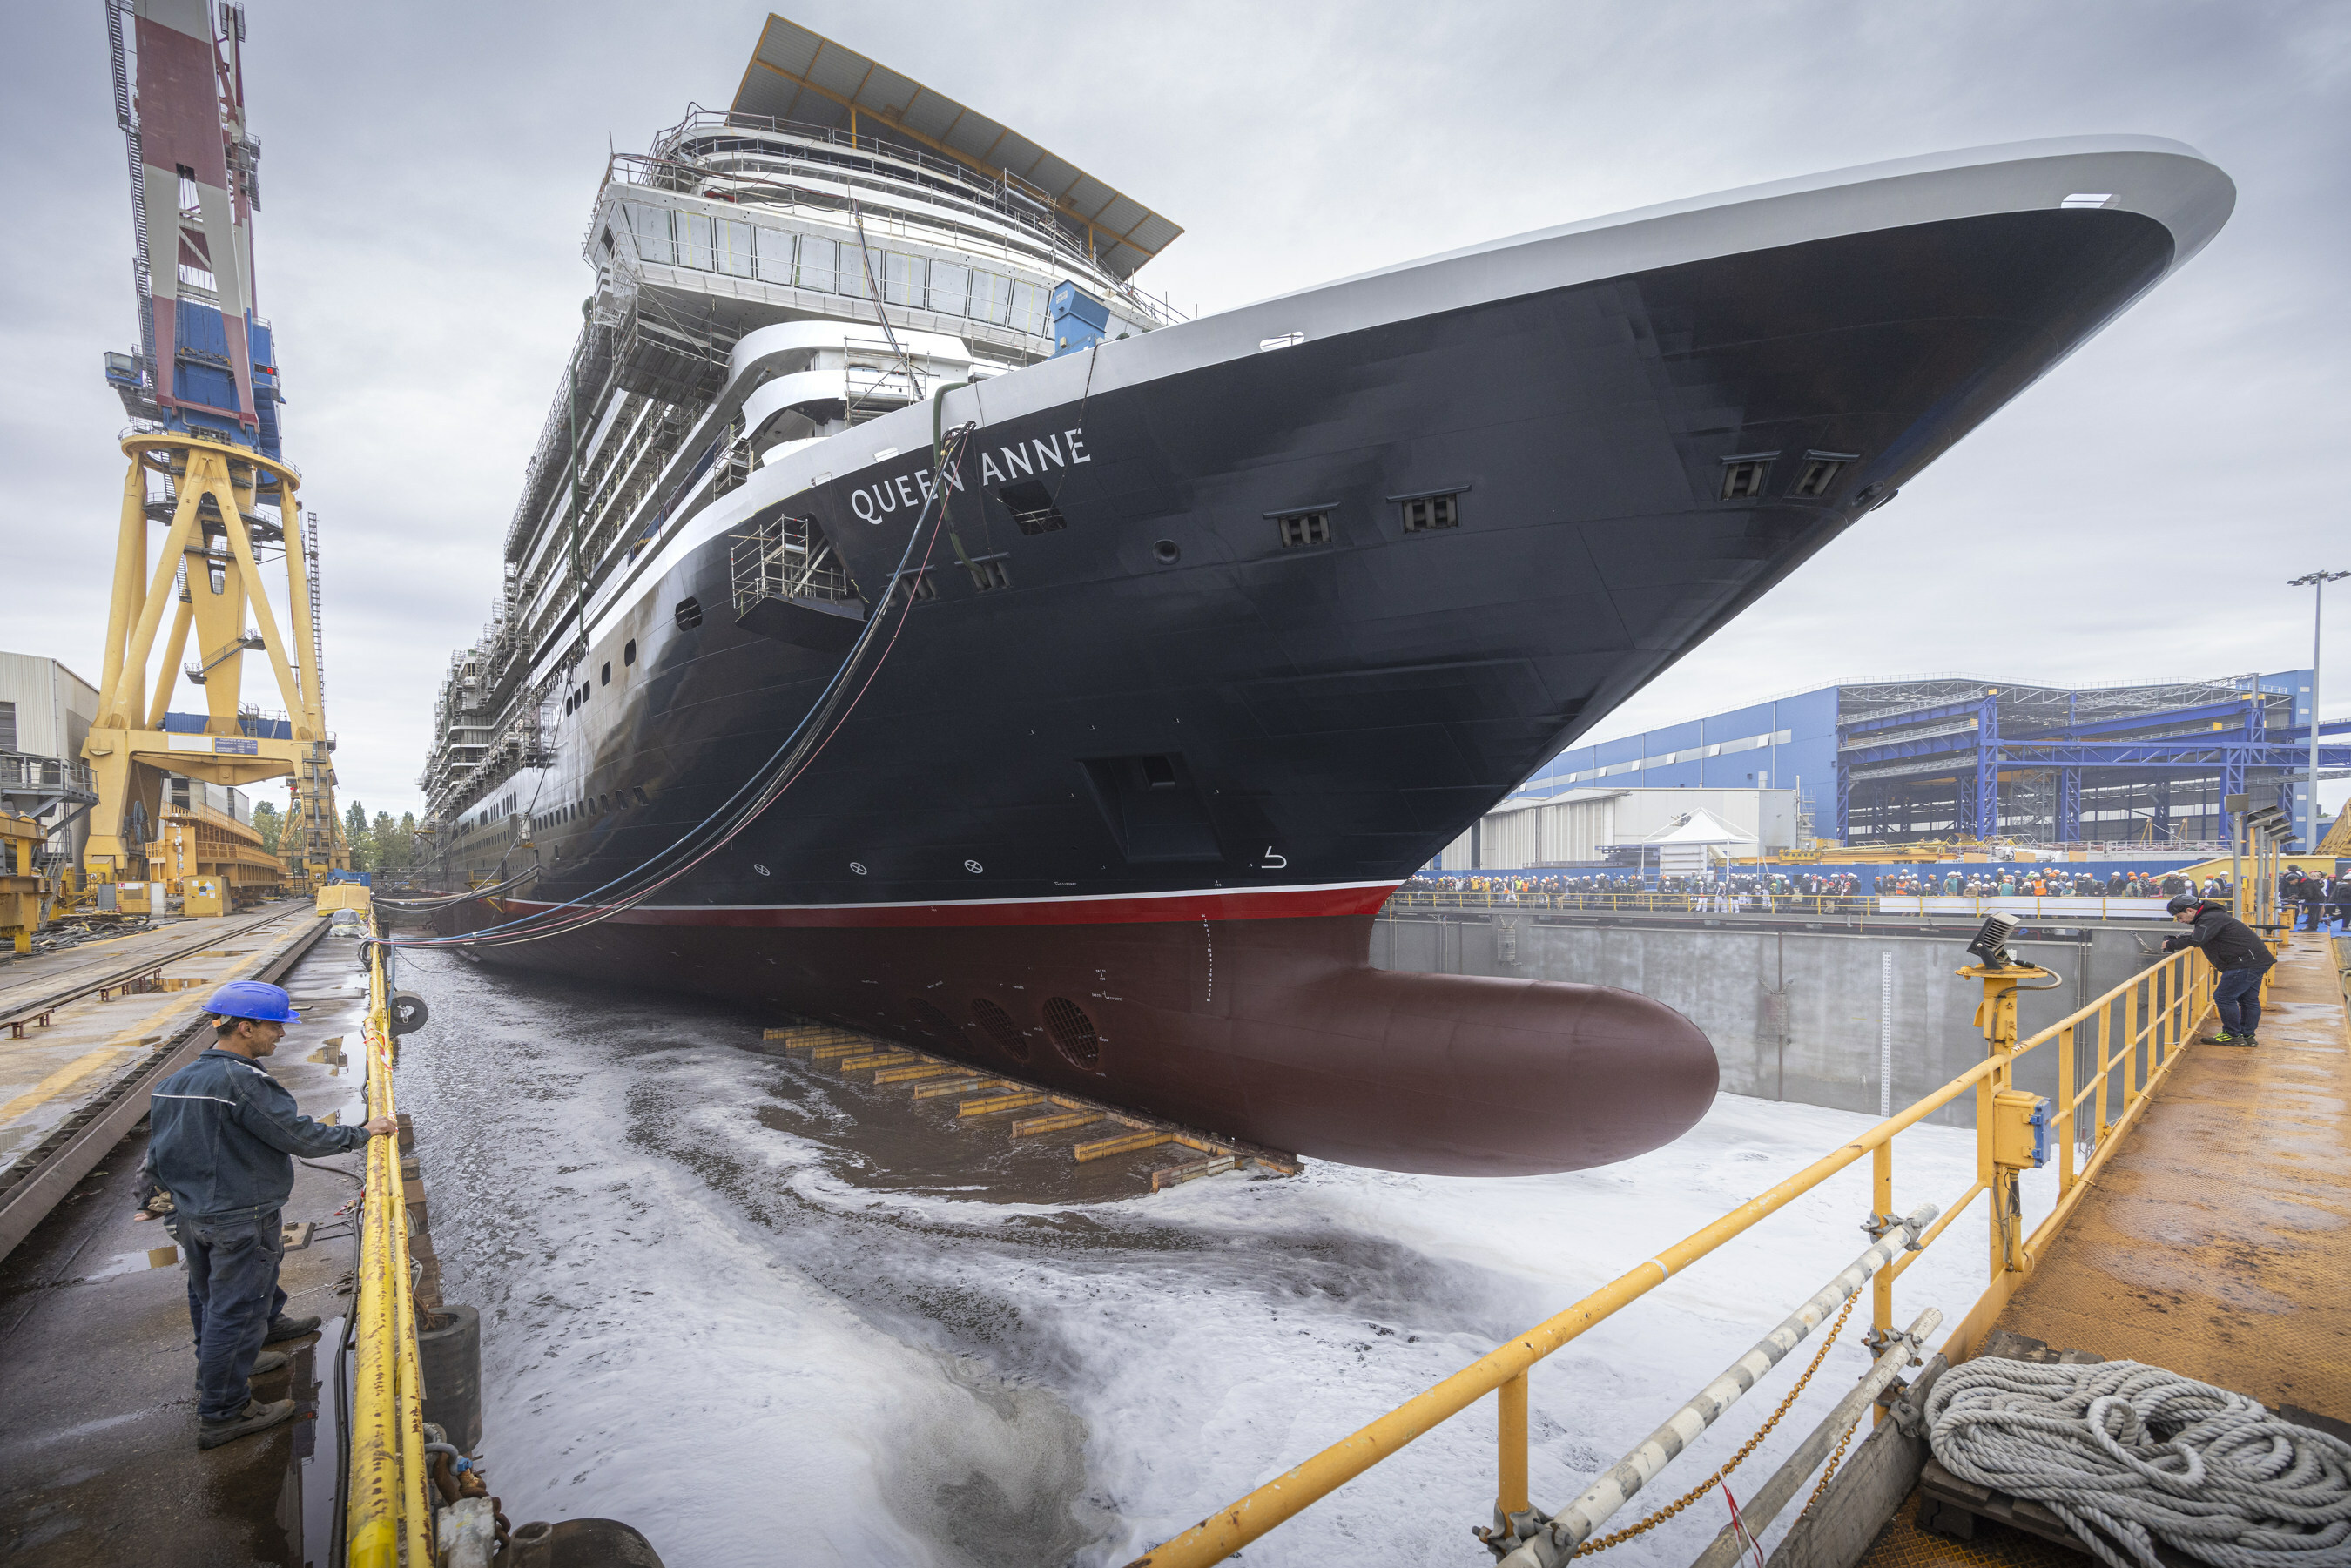 Cunard celebrated a momentous construction milestone today with the float out of Queen Anne at the Fincantieri Marghera shipyard in Venice, Italy (Image at LateCruiseNews.com - May 2023)